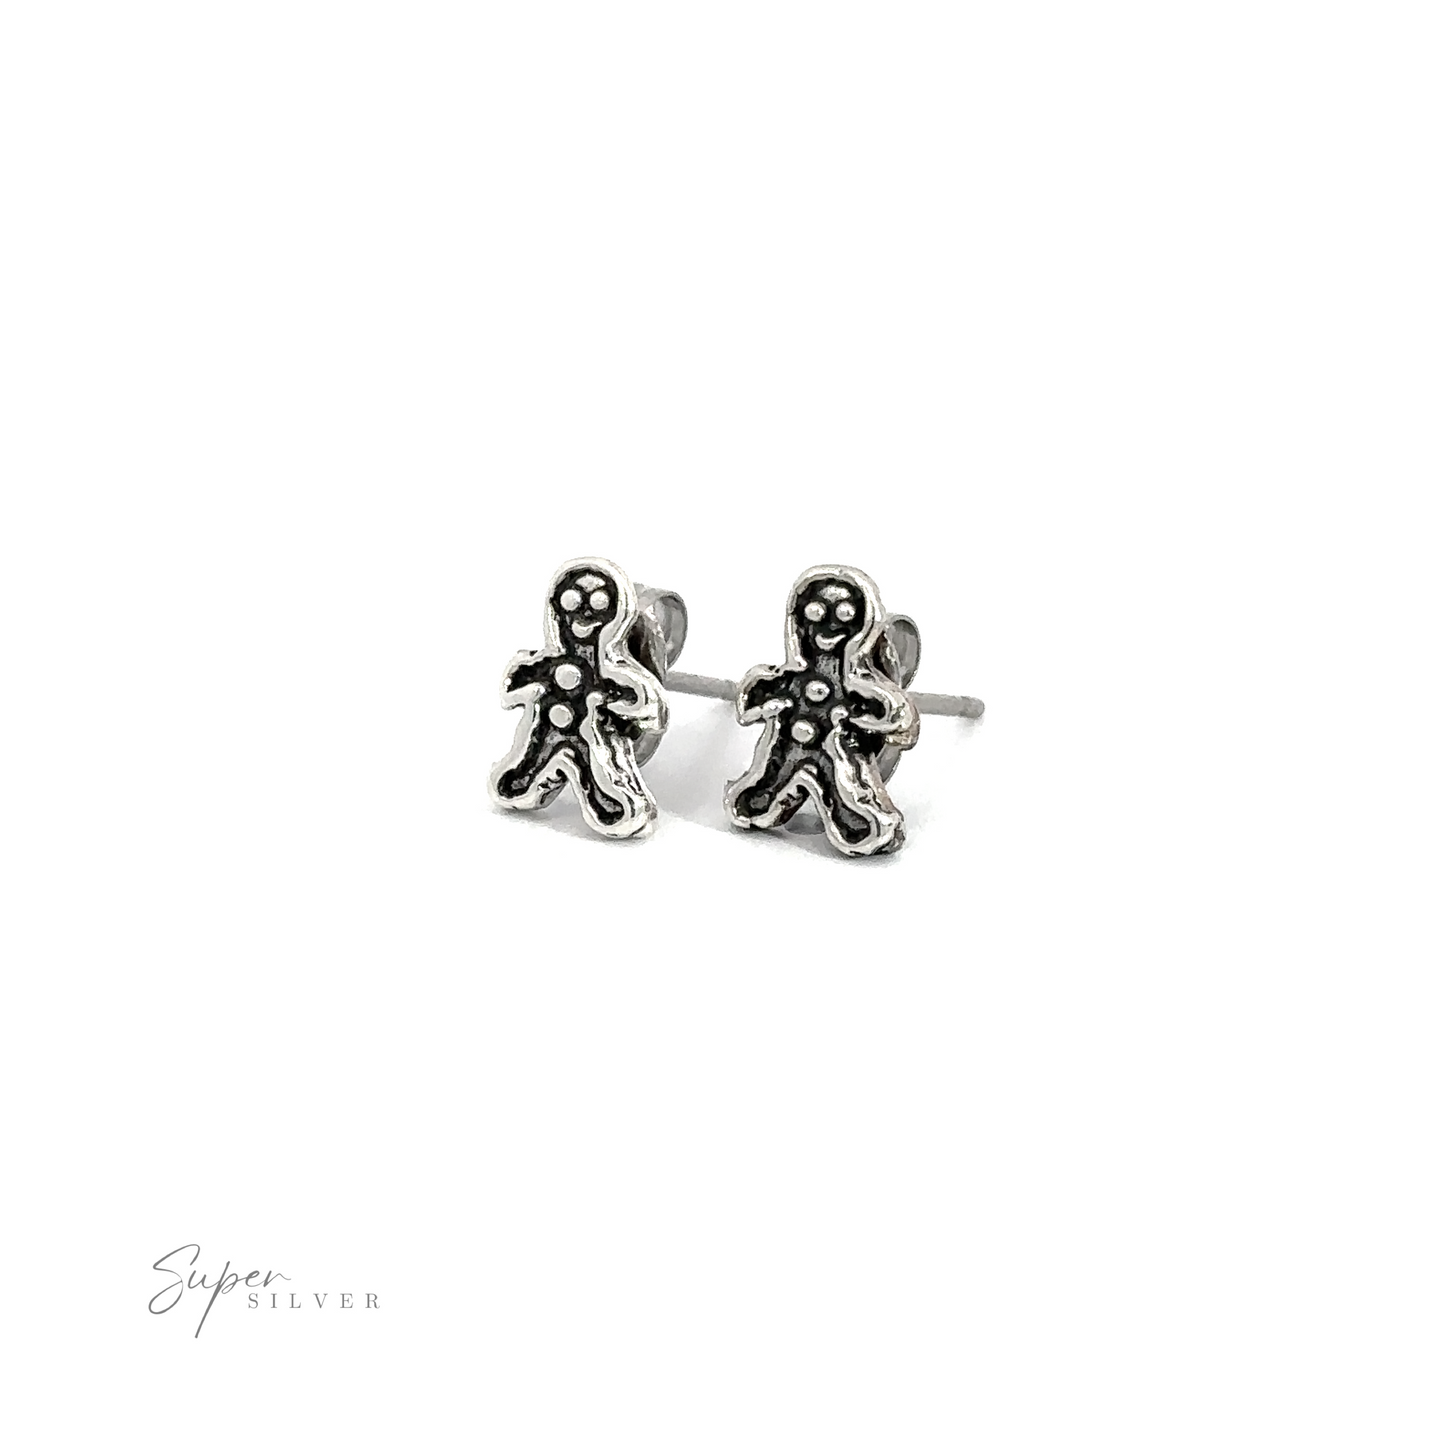 Elevate your festive attire with these charming Gingerbread Man Studs. These silver earrings are adorned with adorable Gingerbread Man Studs, adding a touch of holiday spirit to your outfit.